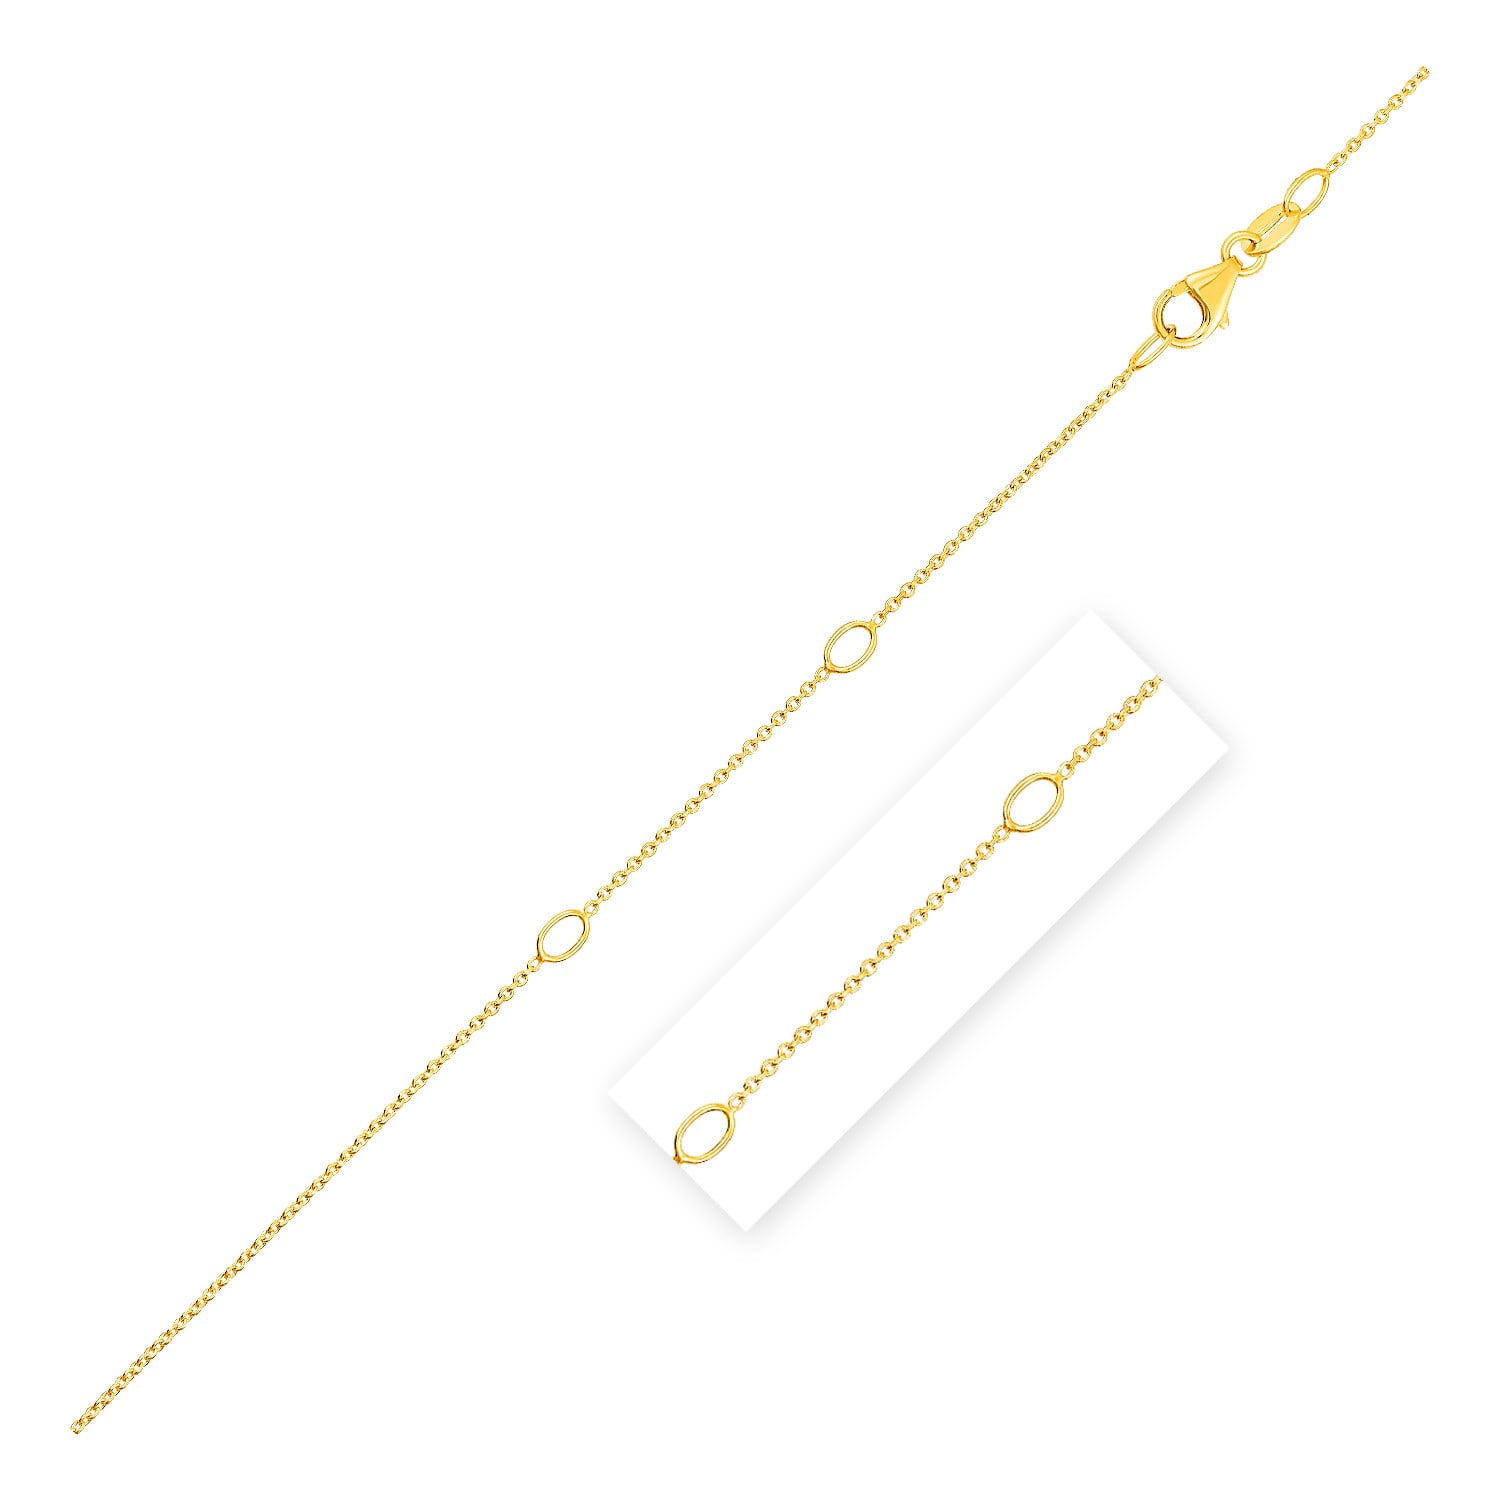 Peora 14K Yellow Gold Raso Style Chain Necklace 1.0mm 16 20 inches 18